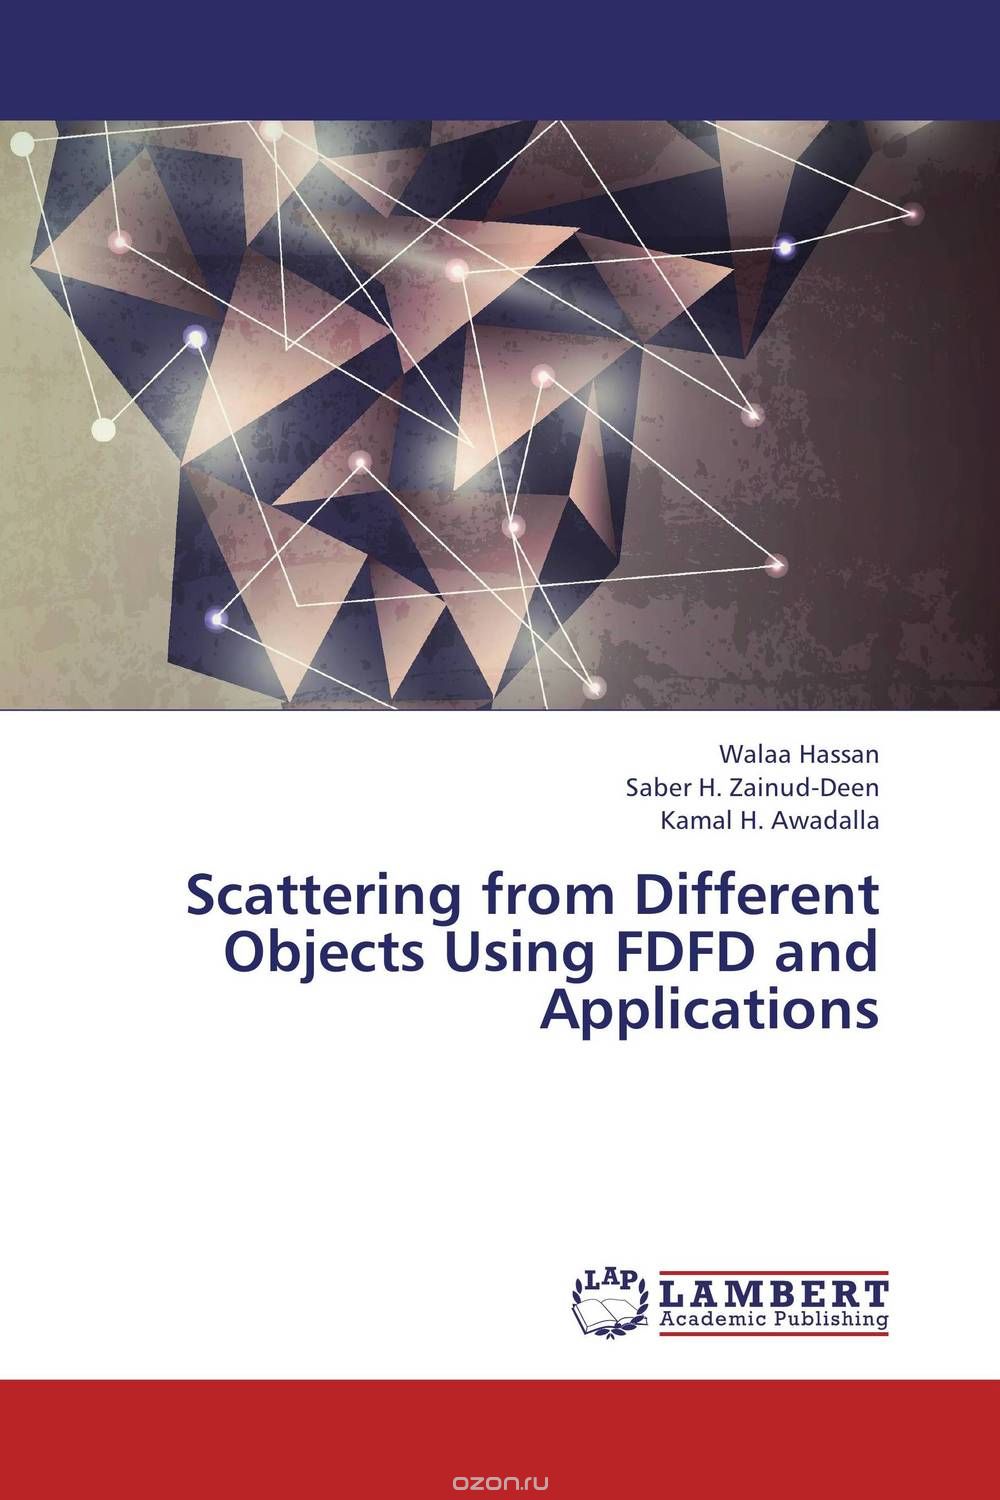 Скачать книгу "Scattering from Different Objects Using FDFD and Applications"